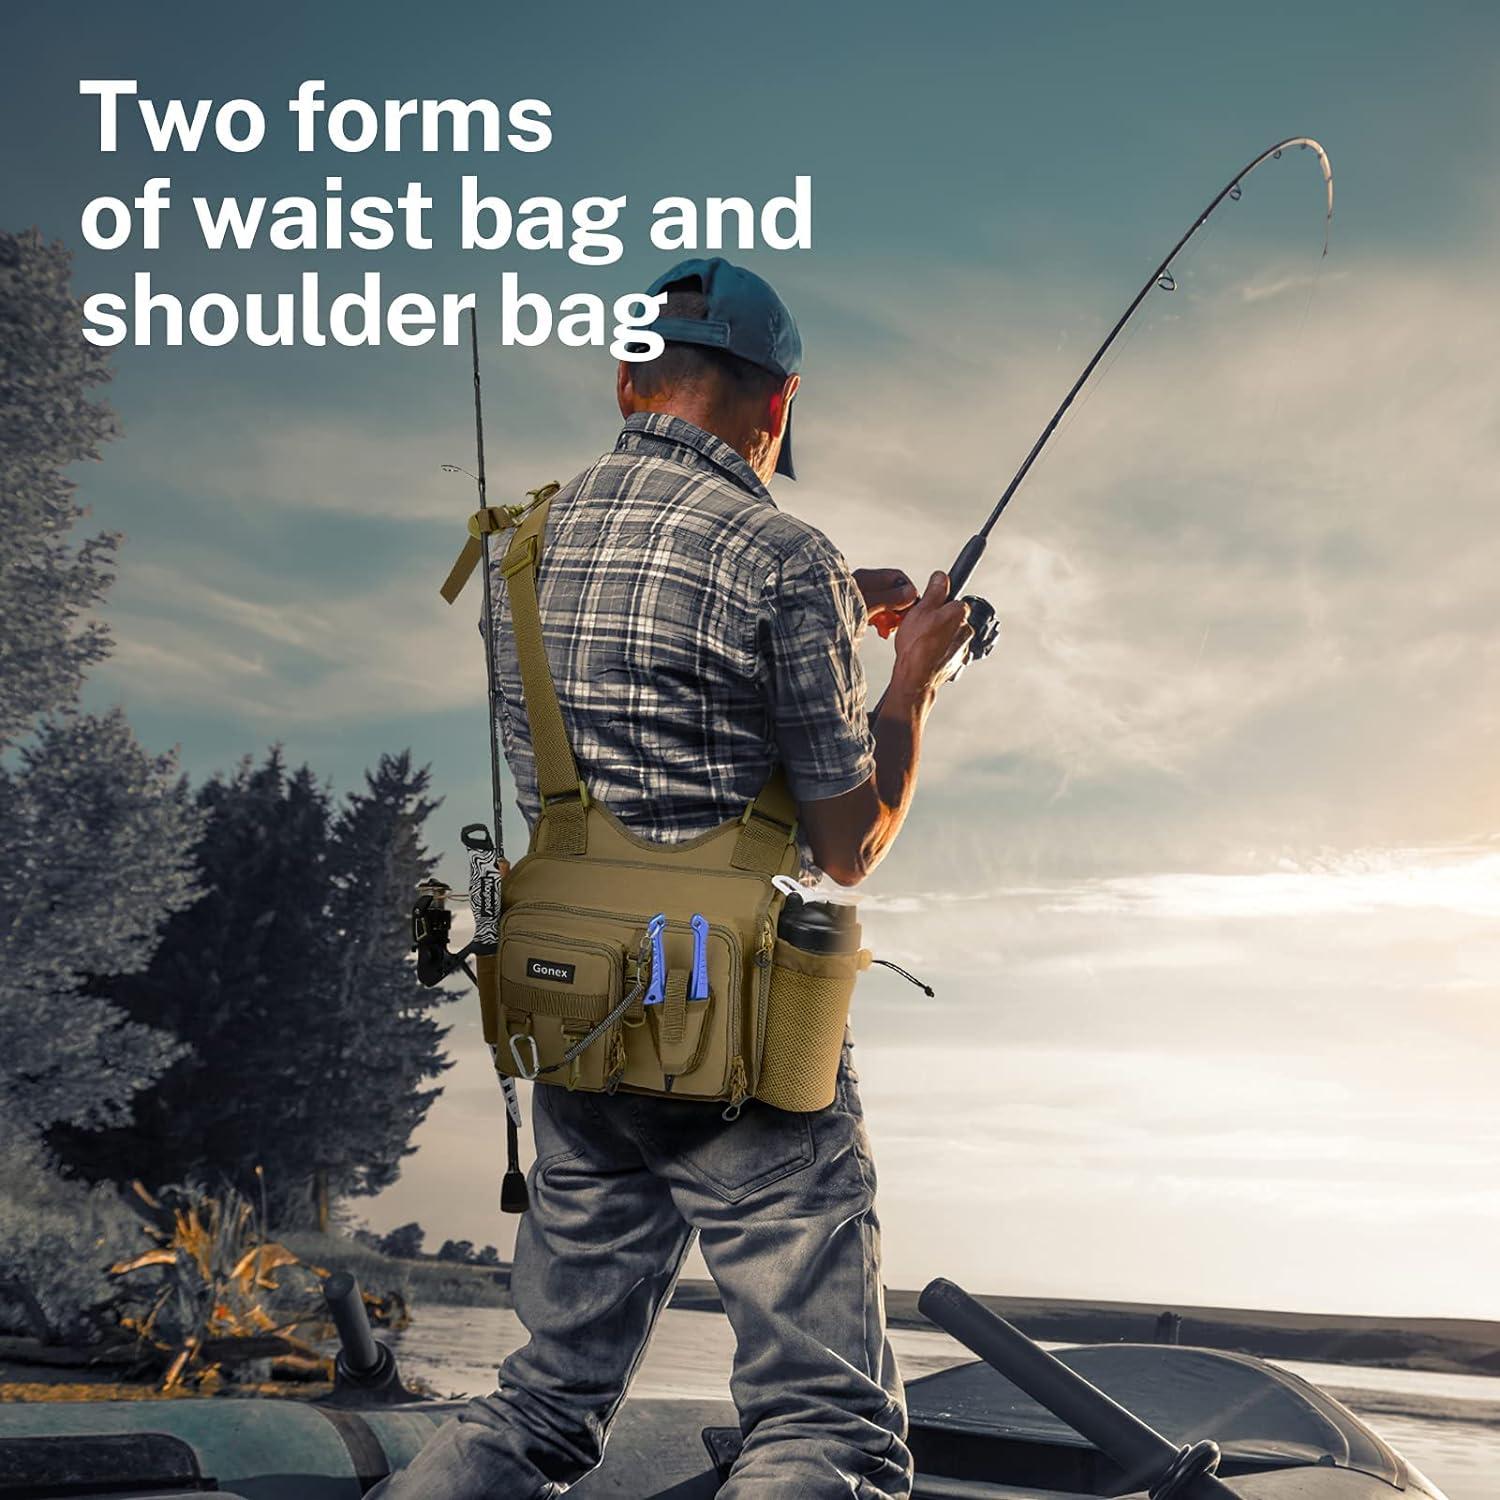 Gonex Fishing Tackle Backpack Storage Sling Bag- Fishing Backpack with 3600 Tackle  Box Removable Shoulder Strap Rod Holder for Fly Fishing Hiking Hunting Men  Women Khaki- with 2 tackle box